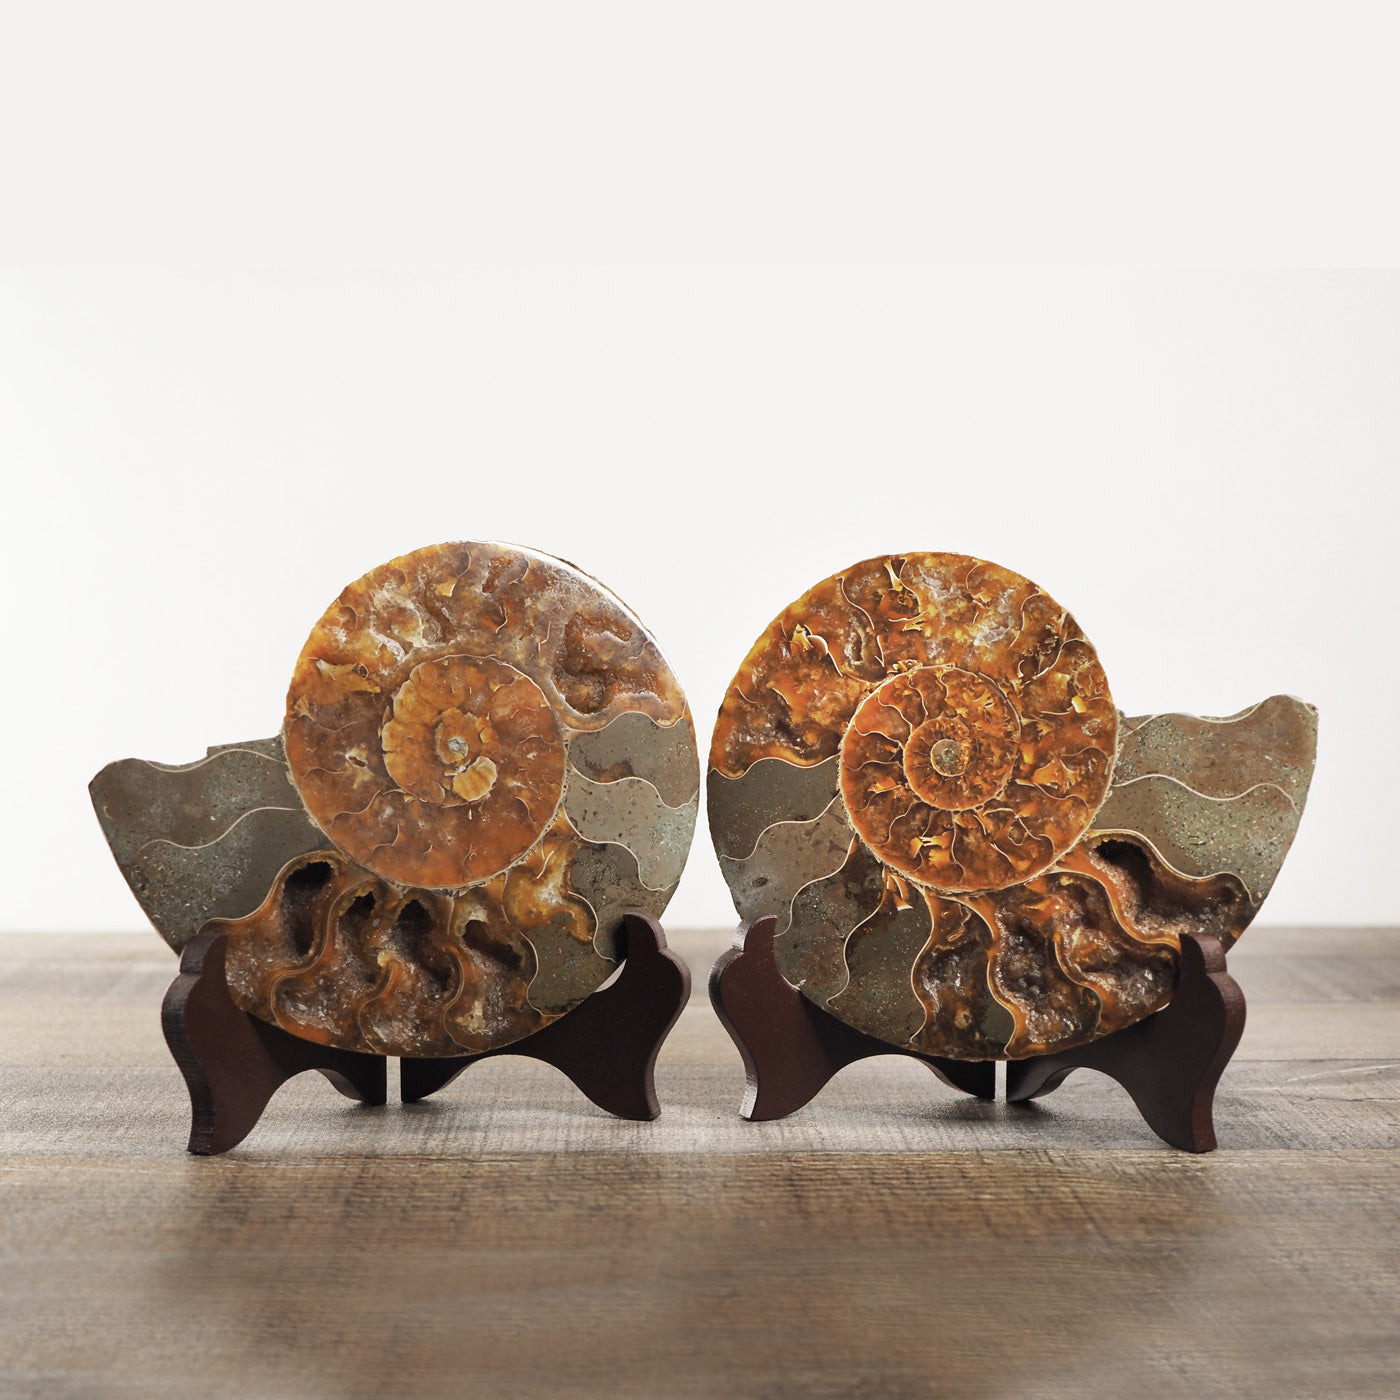 5.25" Orange Agatized Ammonite Fossil Pair on included wooden stands 